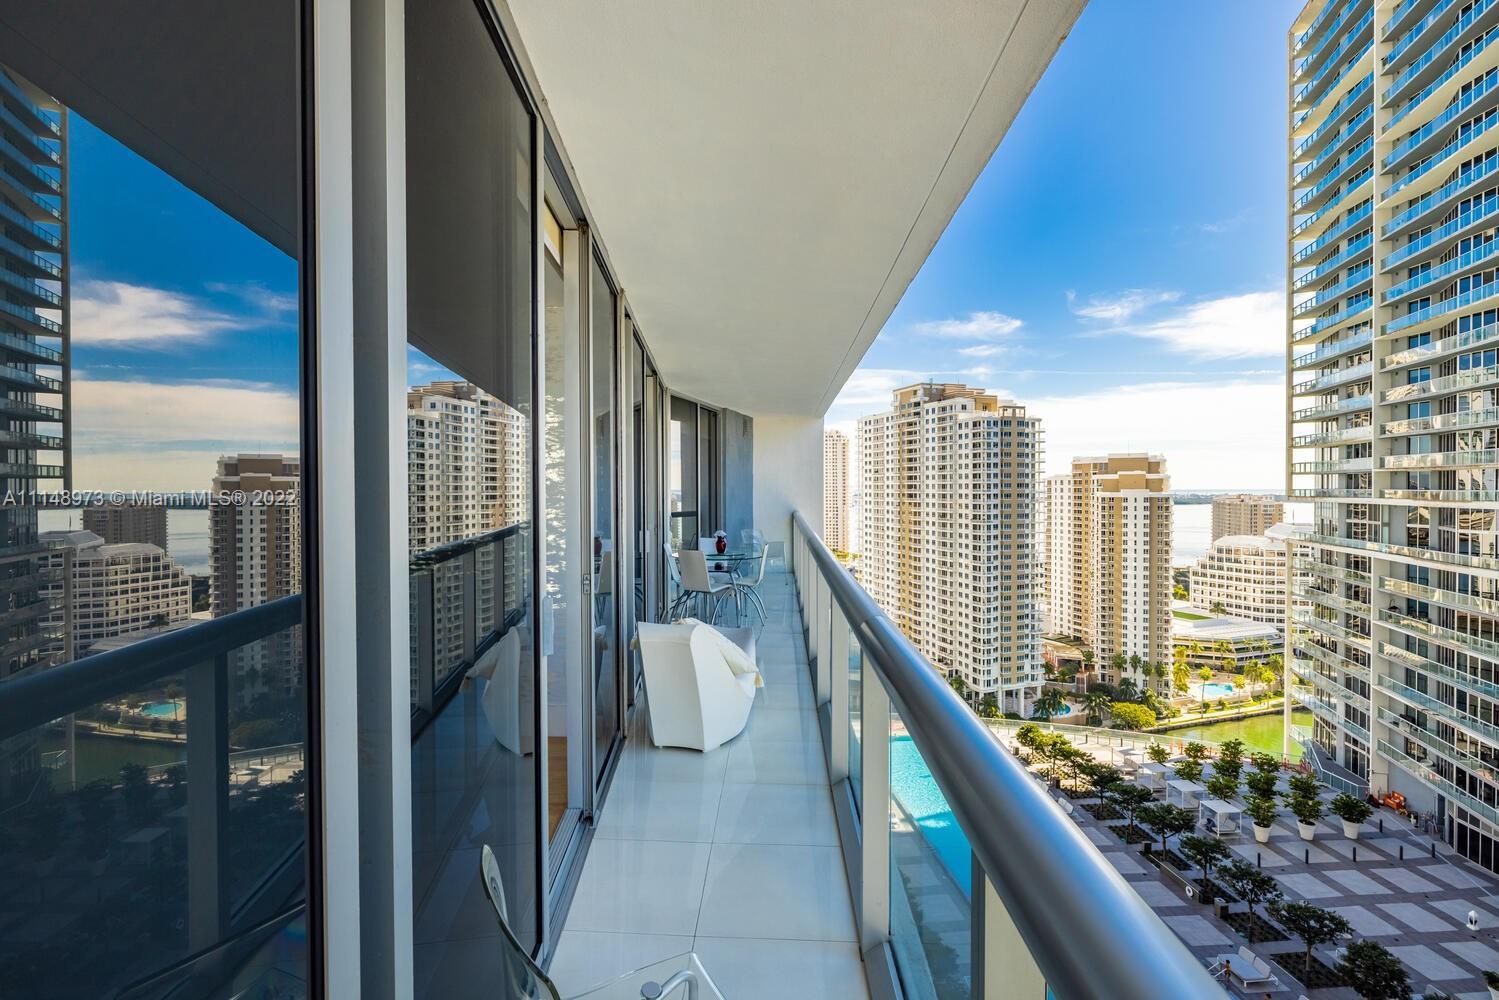 Bright Corner Residence 2-bedroom 2-bath @ ICON BRICKELL, Tower I. This residence features 1,330 Sq 